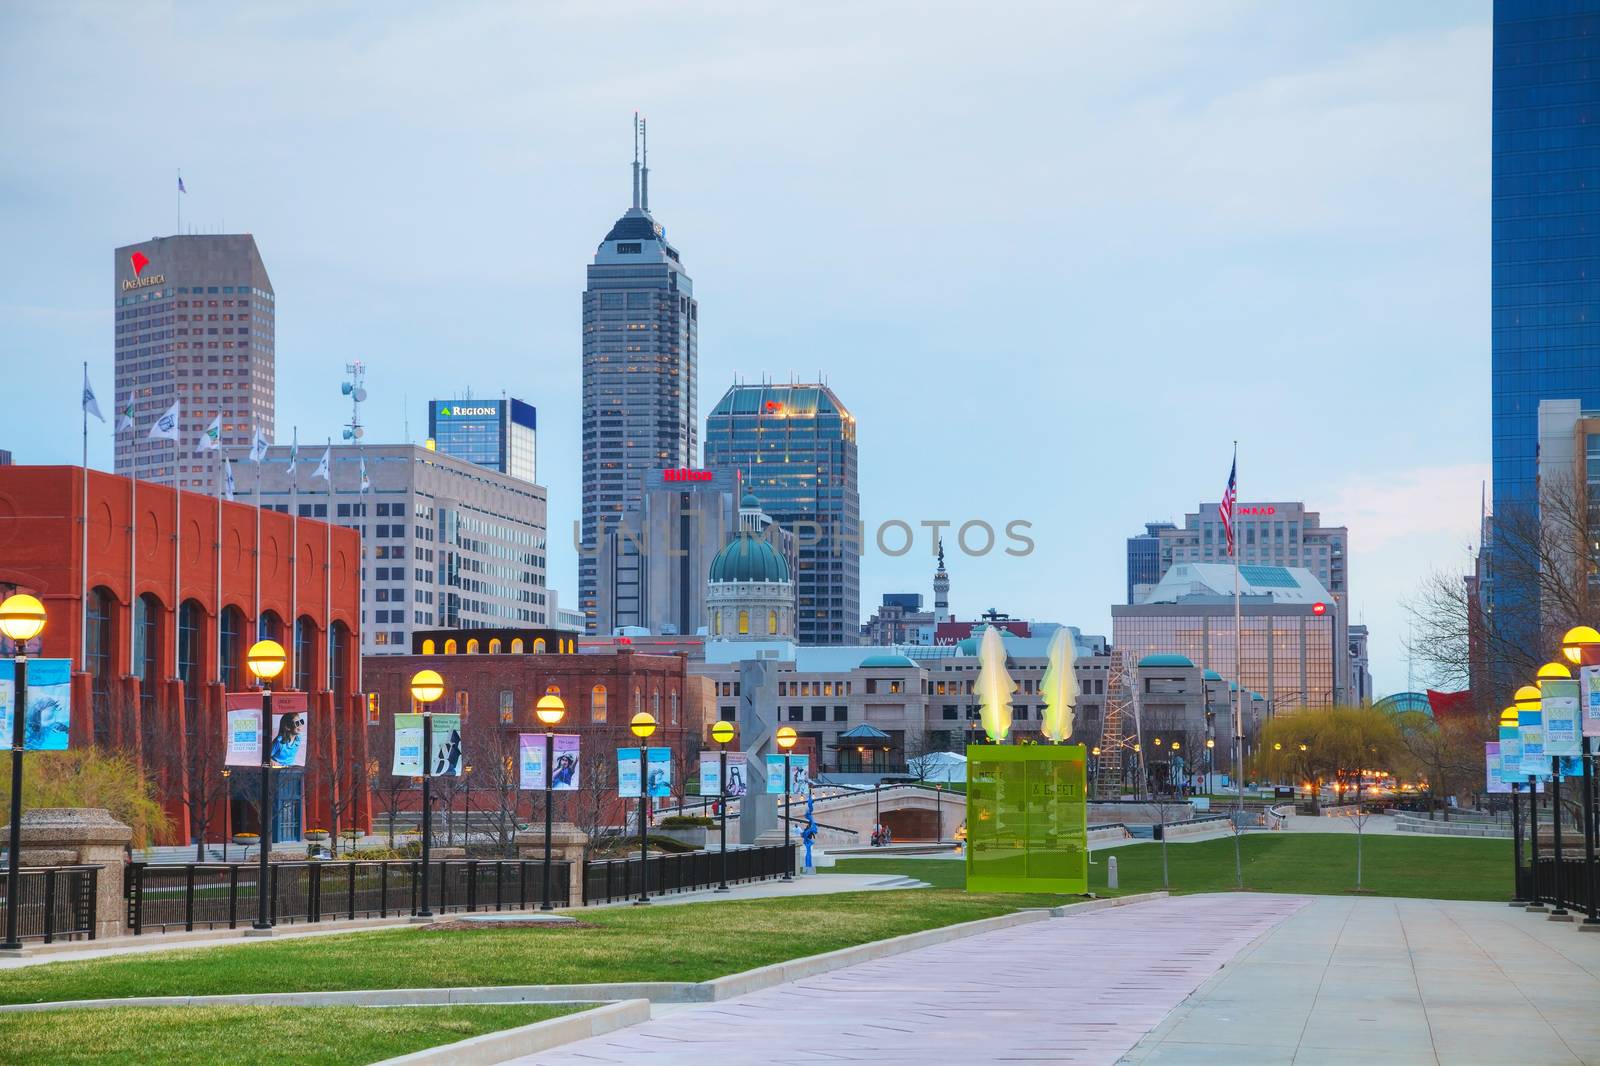 INDIANAPOLIS - APRIL 11: Downtown overview on April 11, 2014 in Indianapolis, Indiana. It's the capital and most populous city of the U.S. state of Indiana, and also the county seat of Marion County.